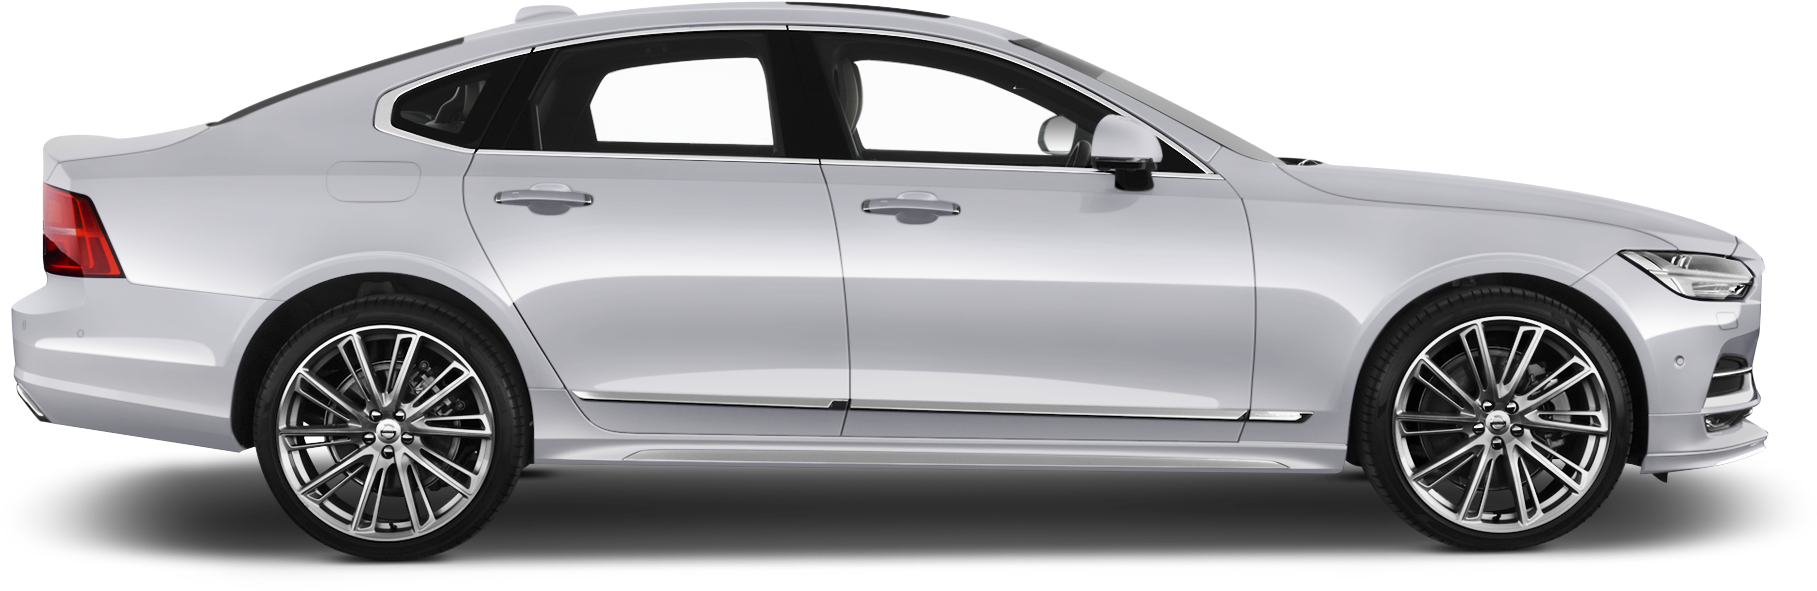 Volvo S90 Company Car Side View - Volvo S90 Side View (2048x1360), Png Download